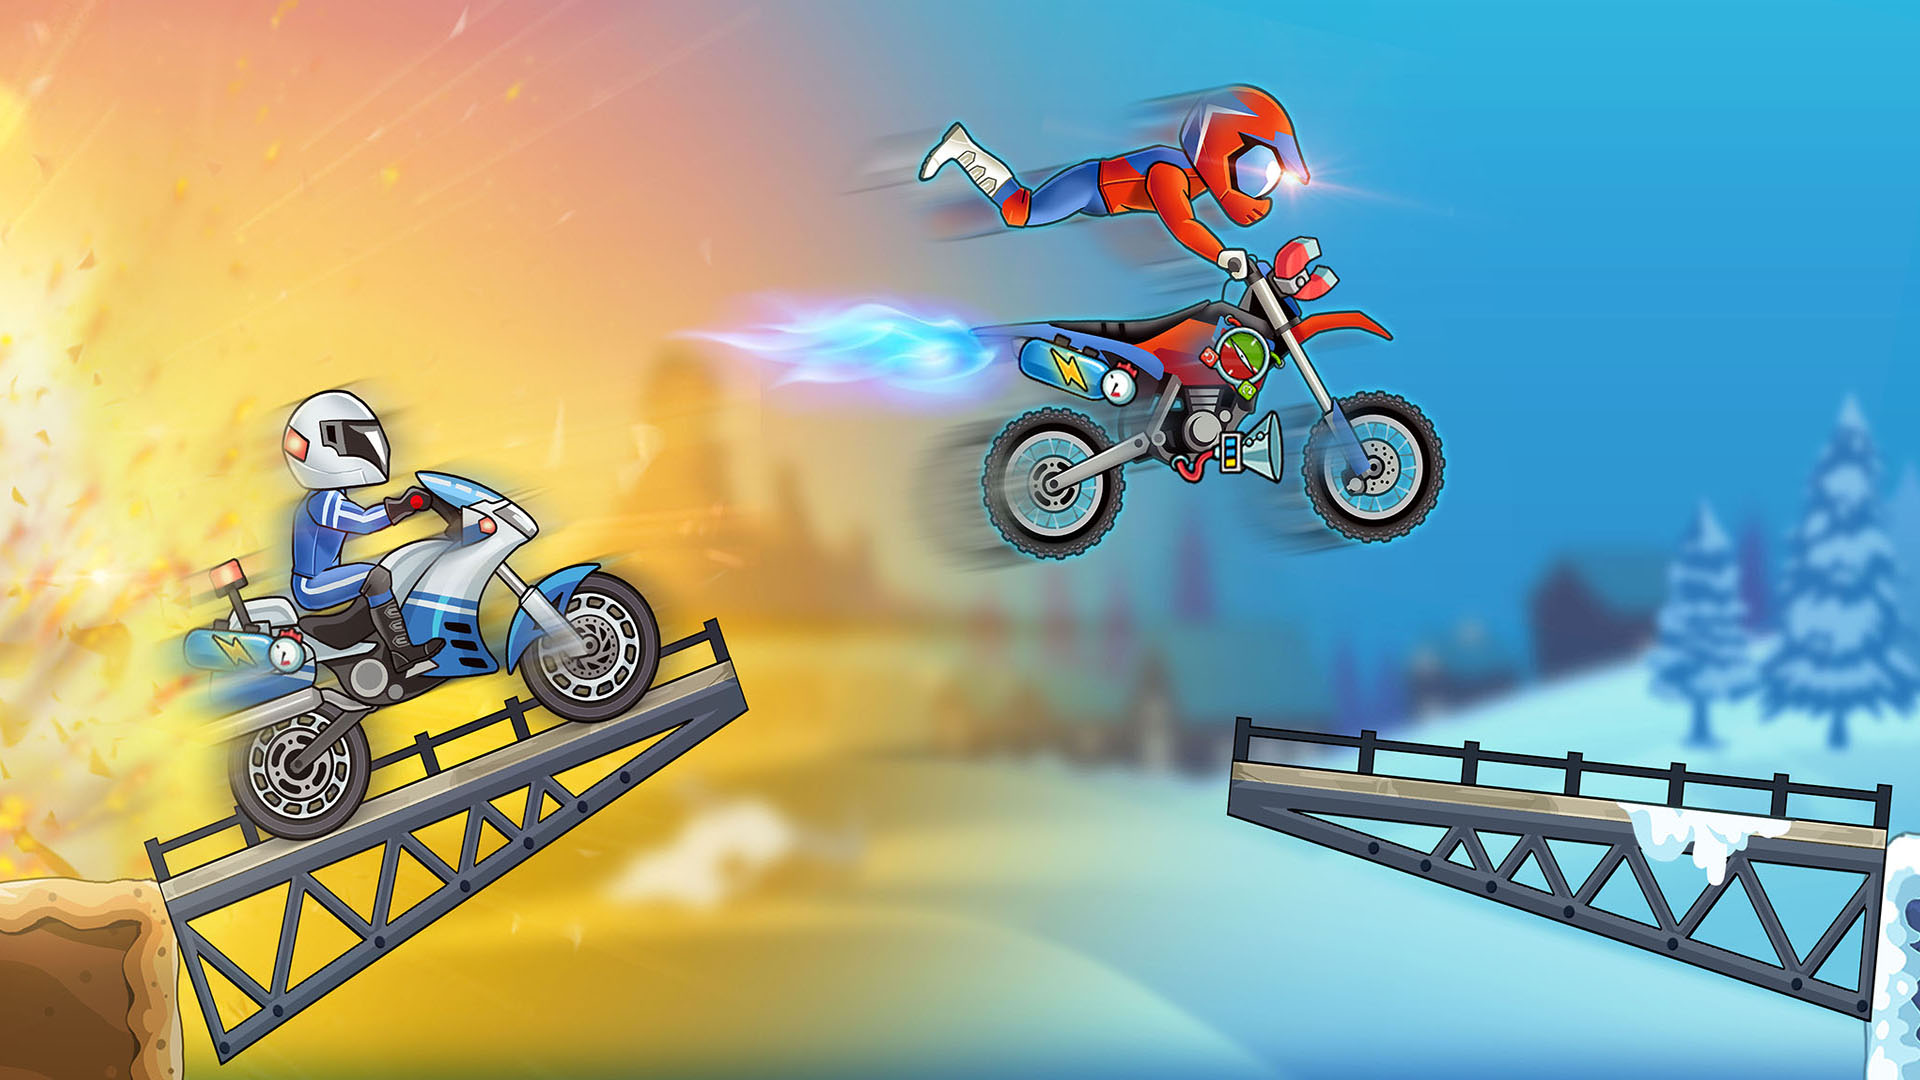 Download Turbo Bike: Extreme Racing Android free game.